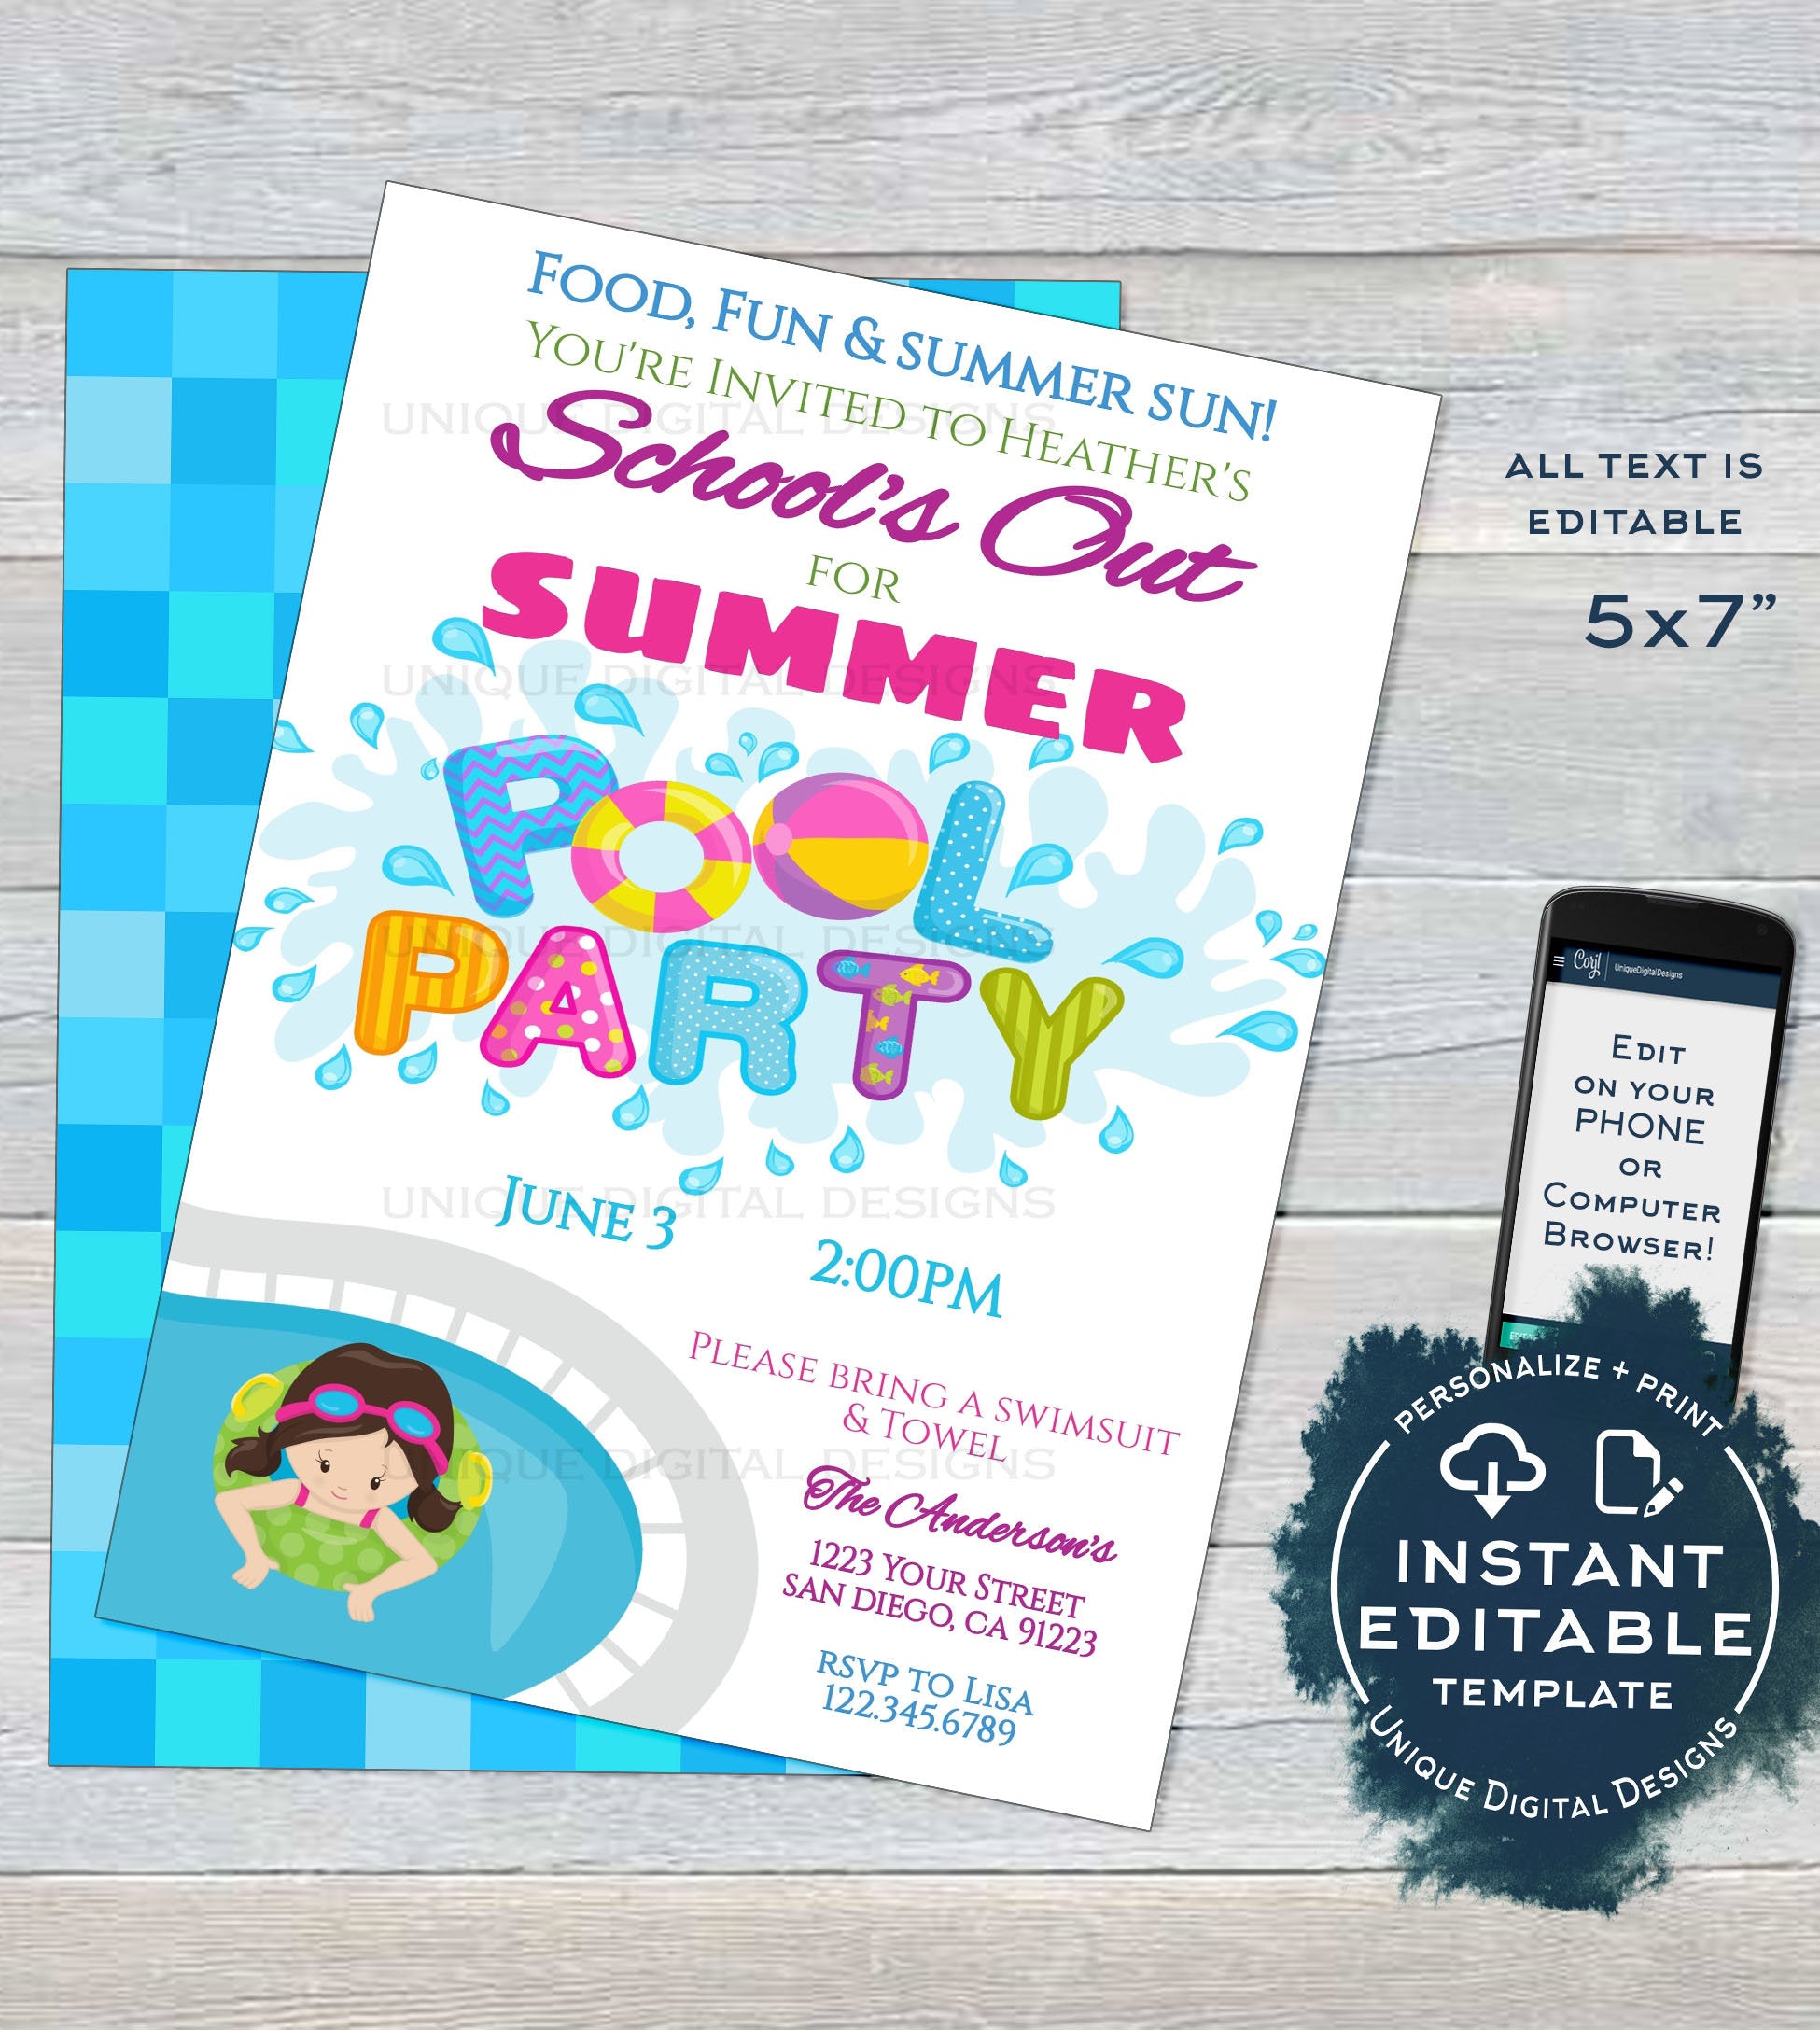 schools-out-for-summer-pool-party-invitation-editable-end-of-school-p